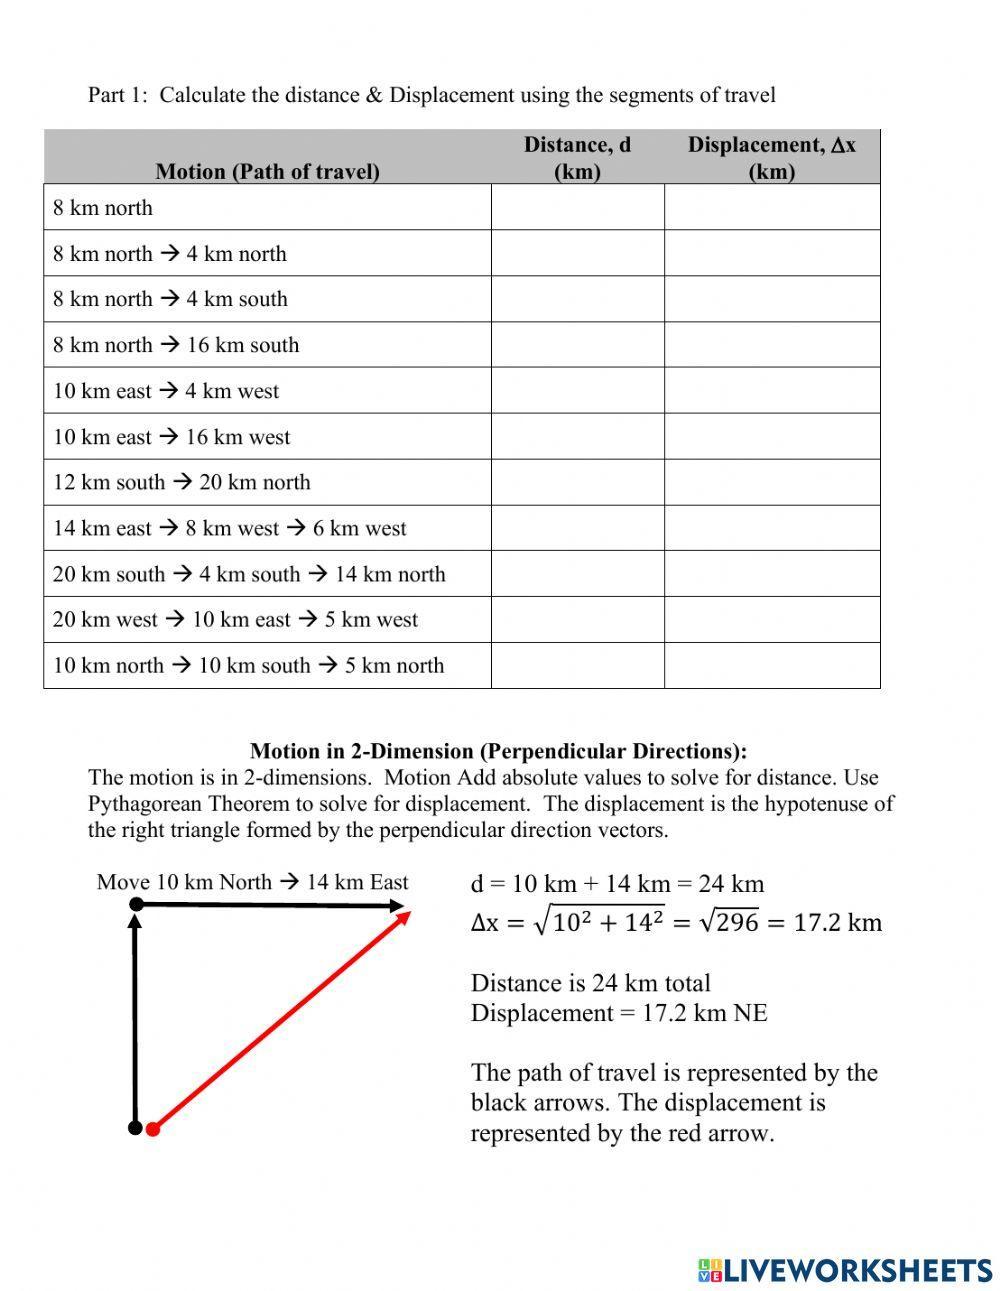 Distance & Displacement Calculations